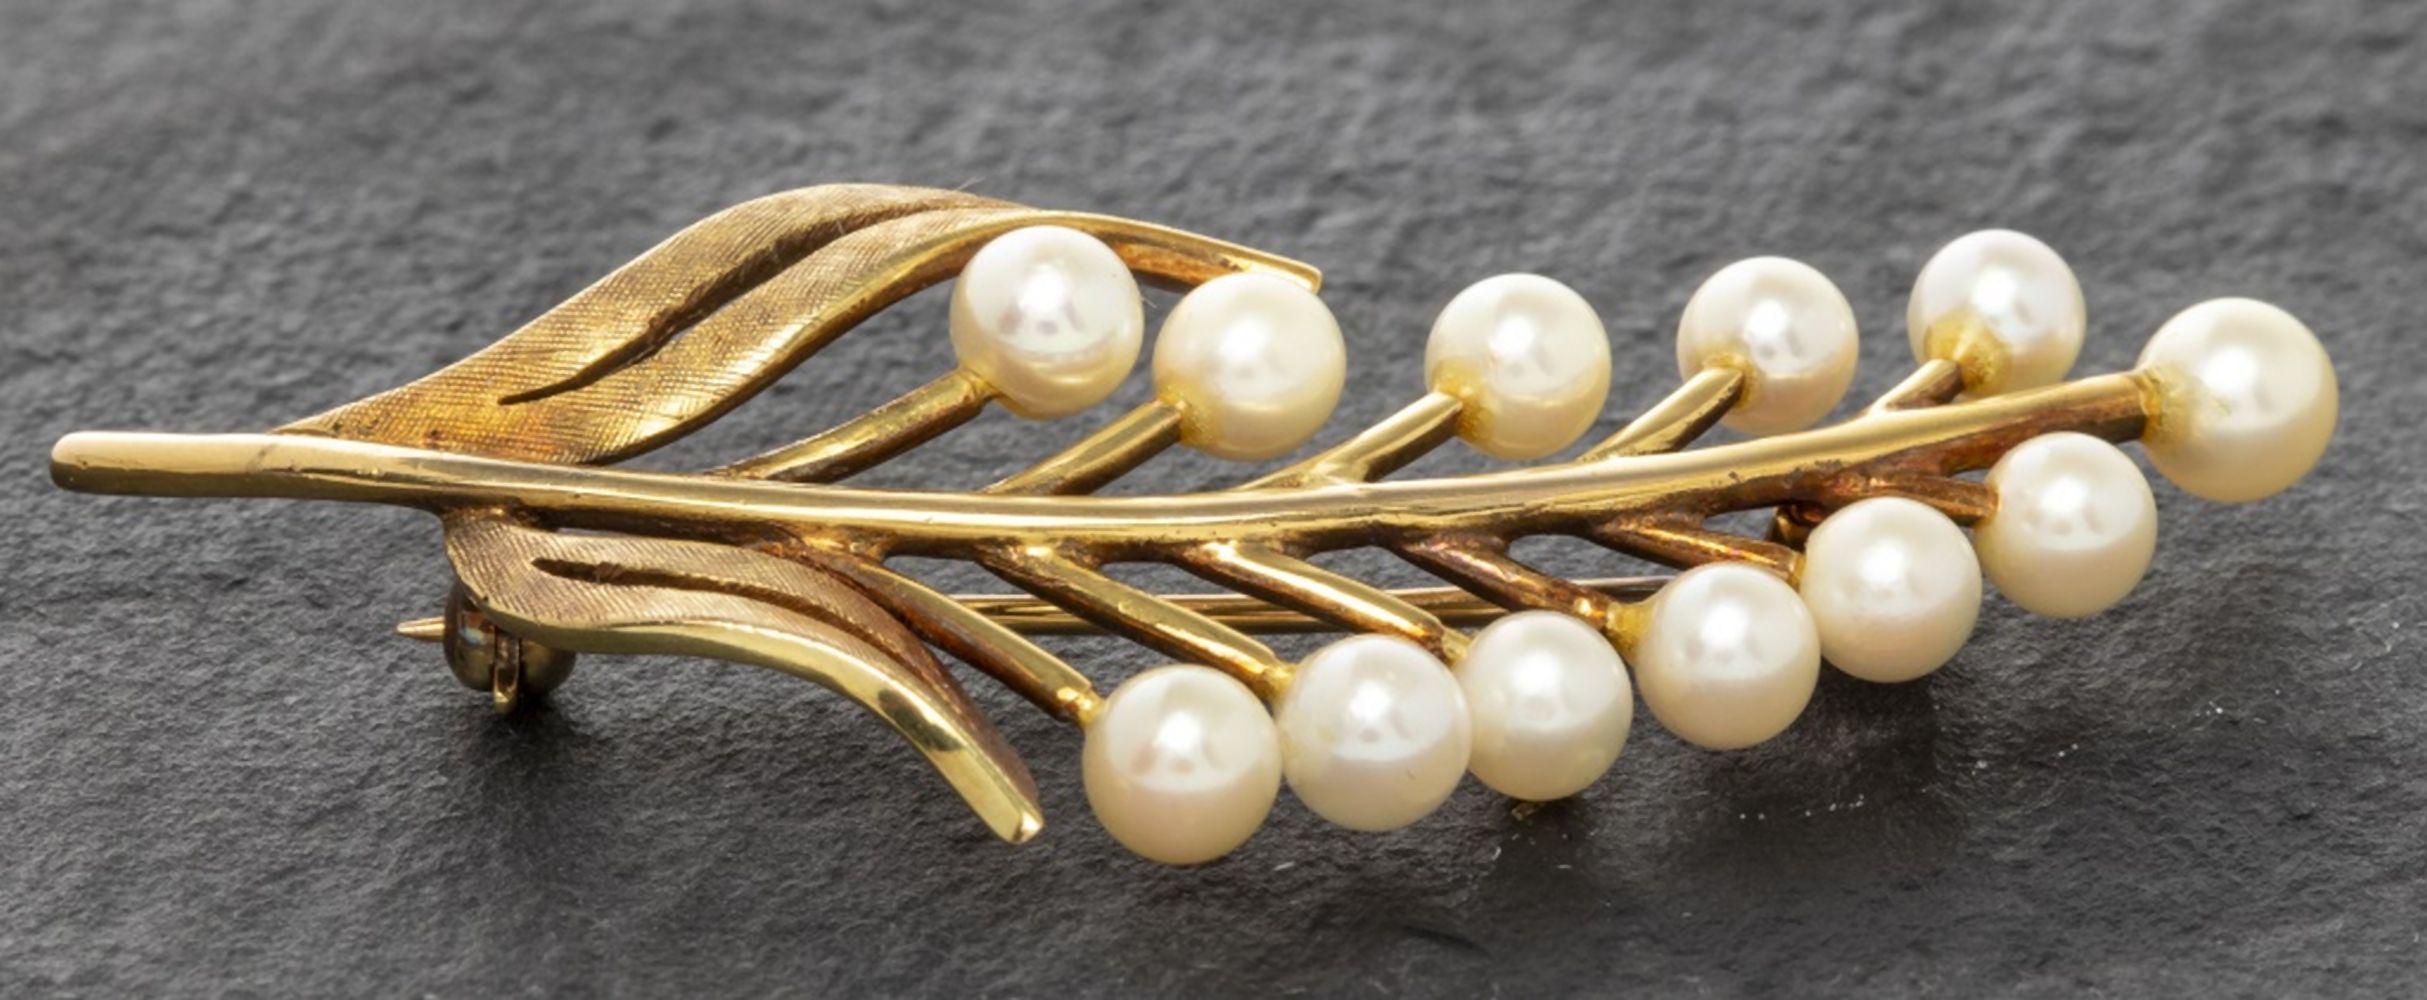 VINTAGE 14K YELLOW GOLD PEARL BROOCH